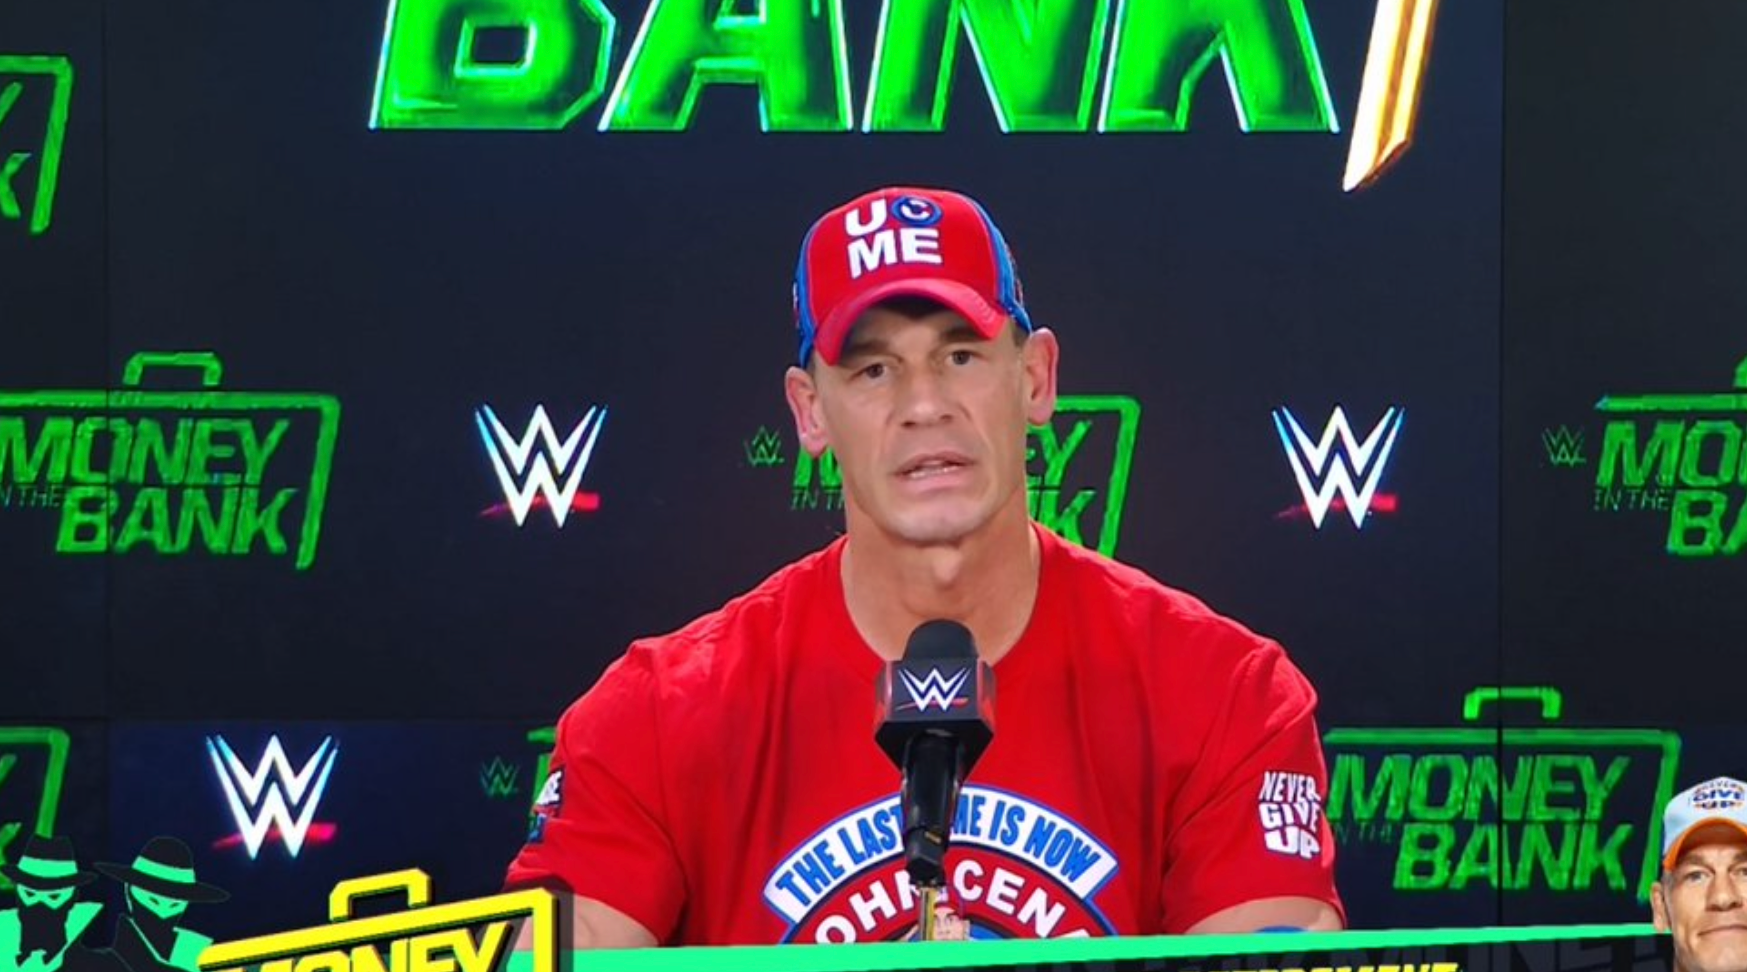 john-cena-wwe-money-in-the-bank-press-conference